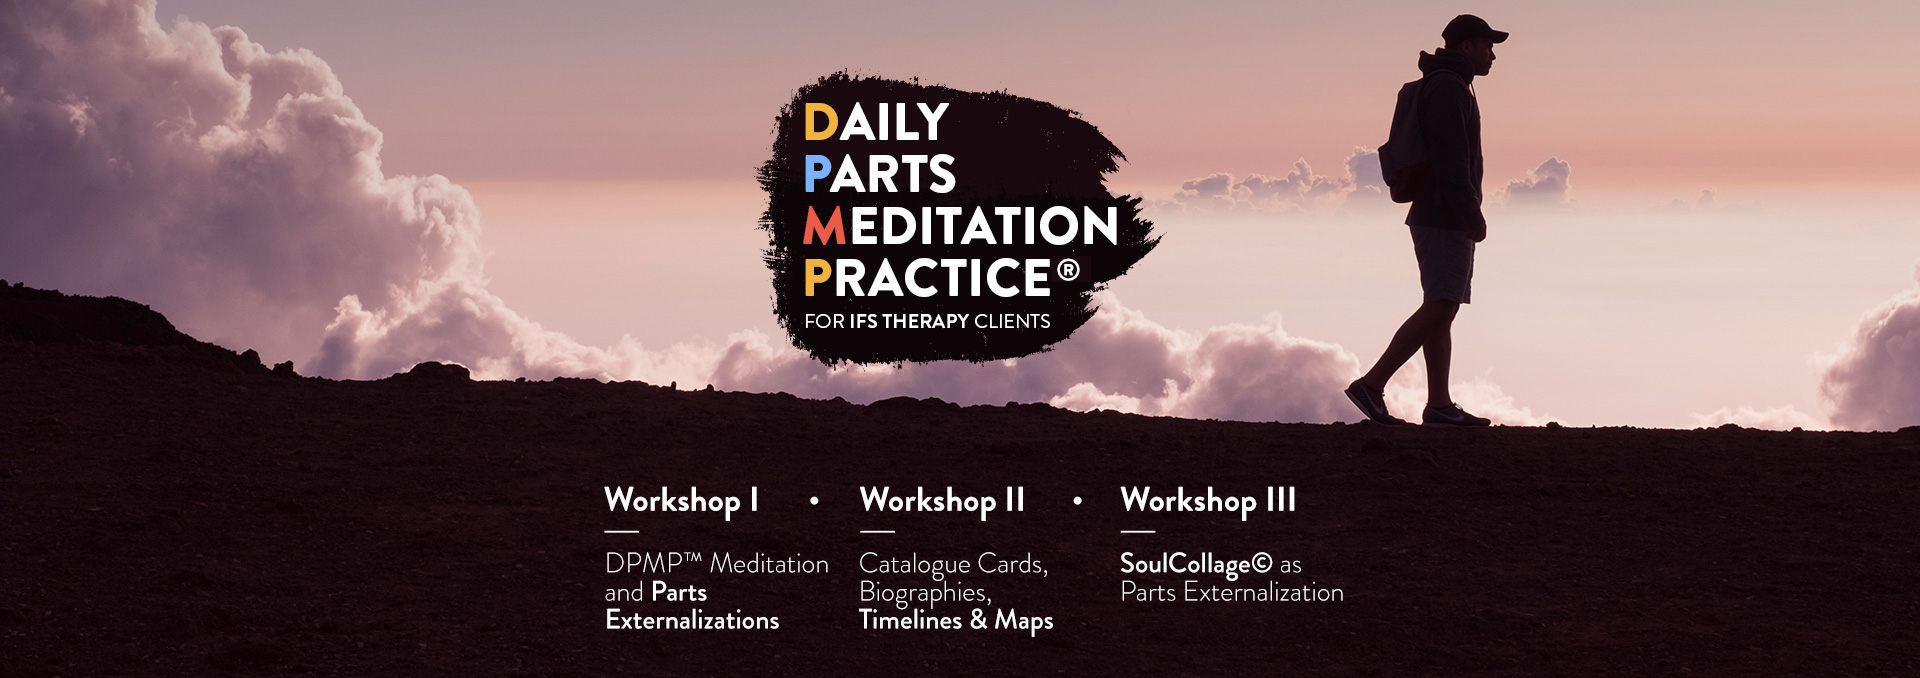 Daily Parts Meditation Practice® for Clients 2